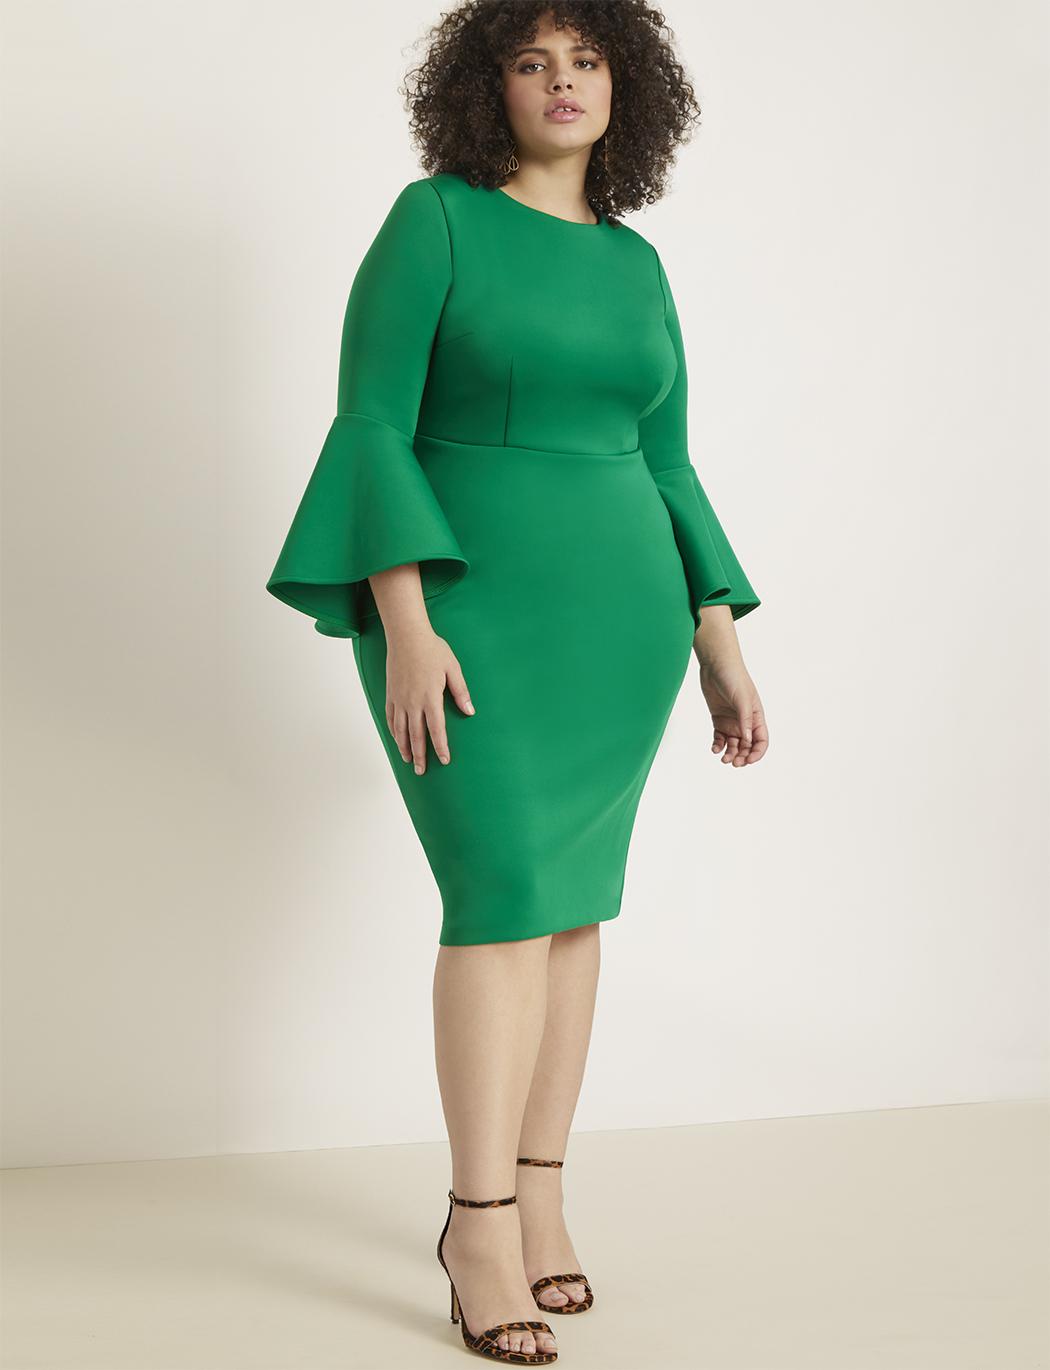 Eloquii Synthetic Flare Sleeve Scuba Dress in Emerald (Green) - Lyst